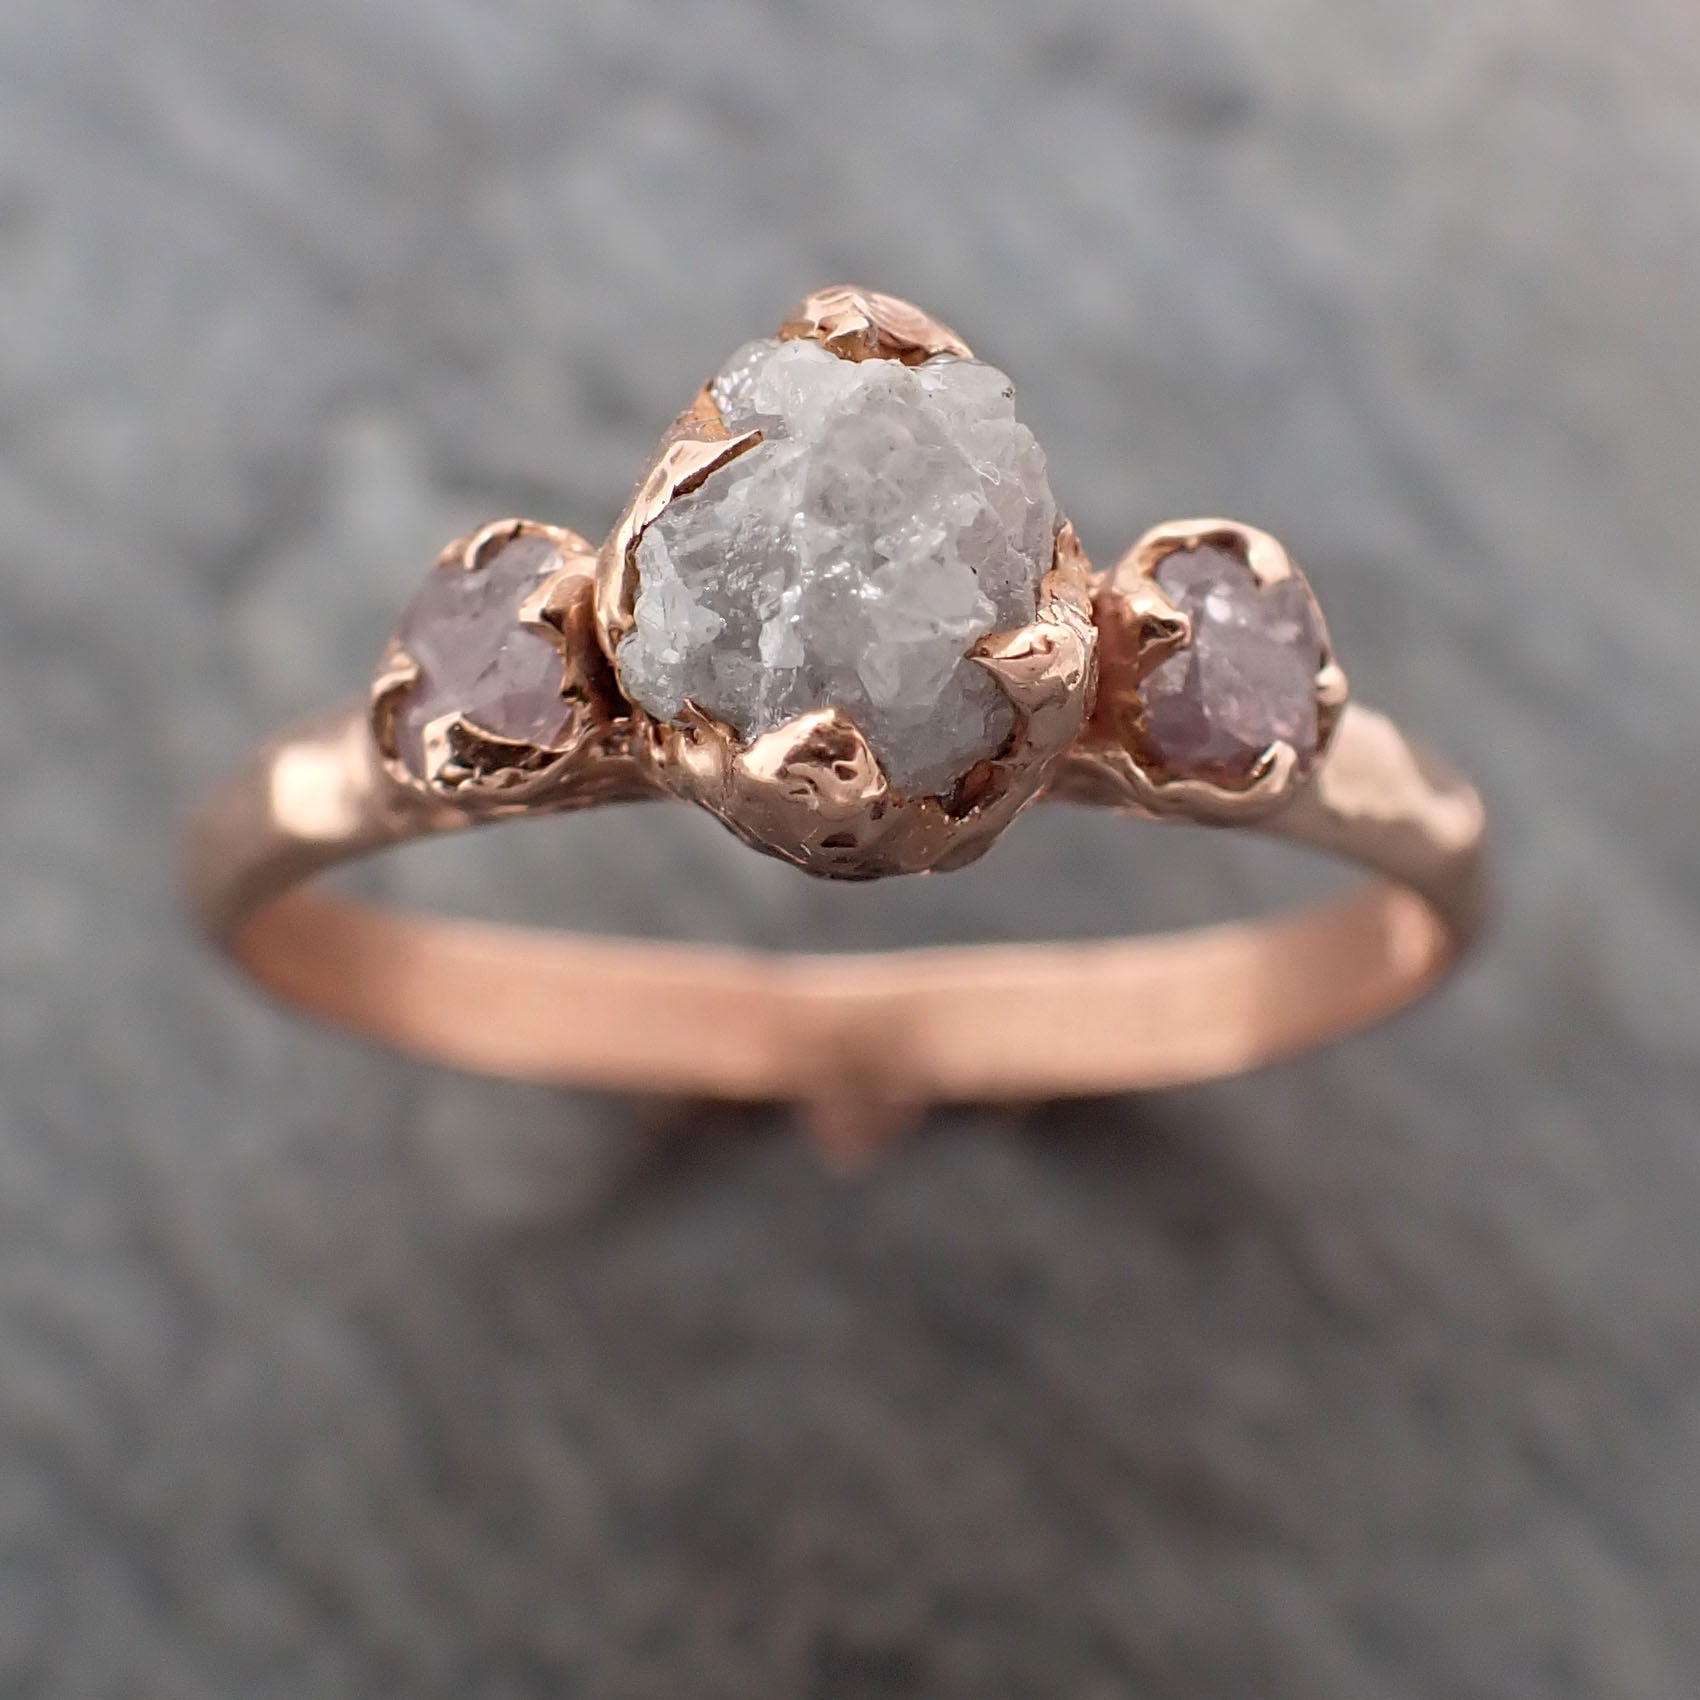 rough diamond with faceted fancy cut pink side diamonds engagement 14k rose gold multi stone wedding ring rough diamond ring byangeline 2334 Alternative Engagement